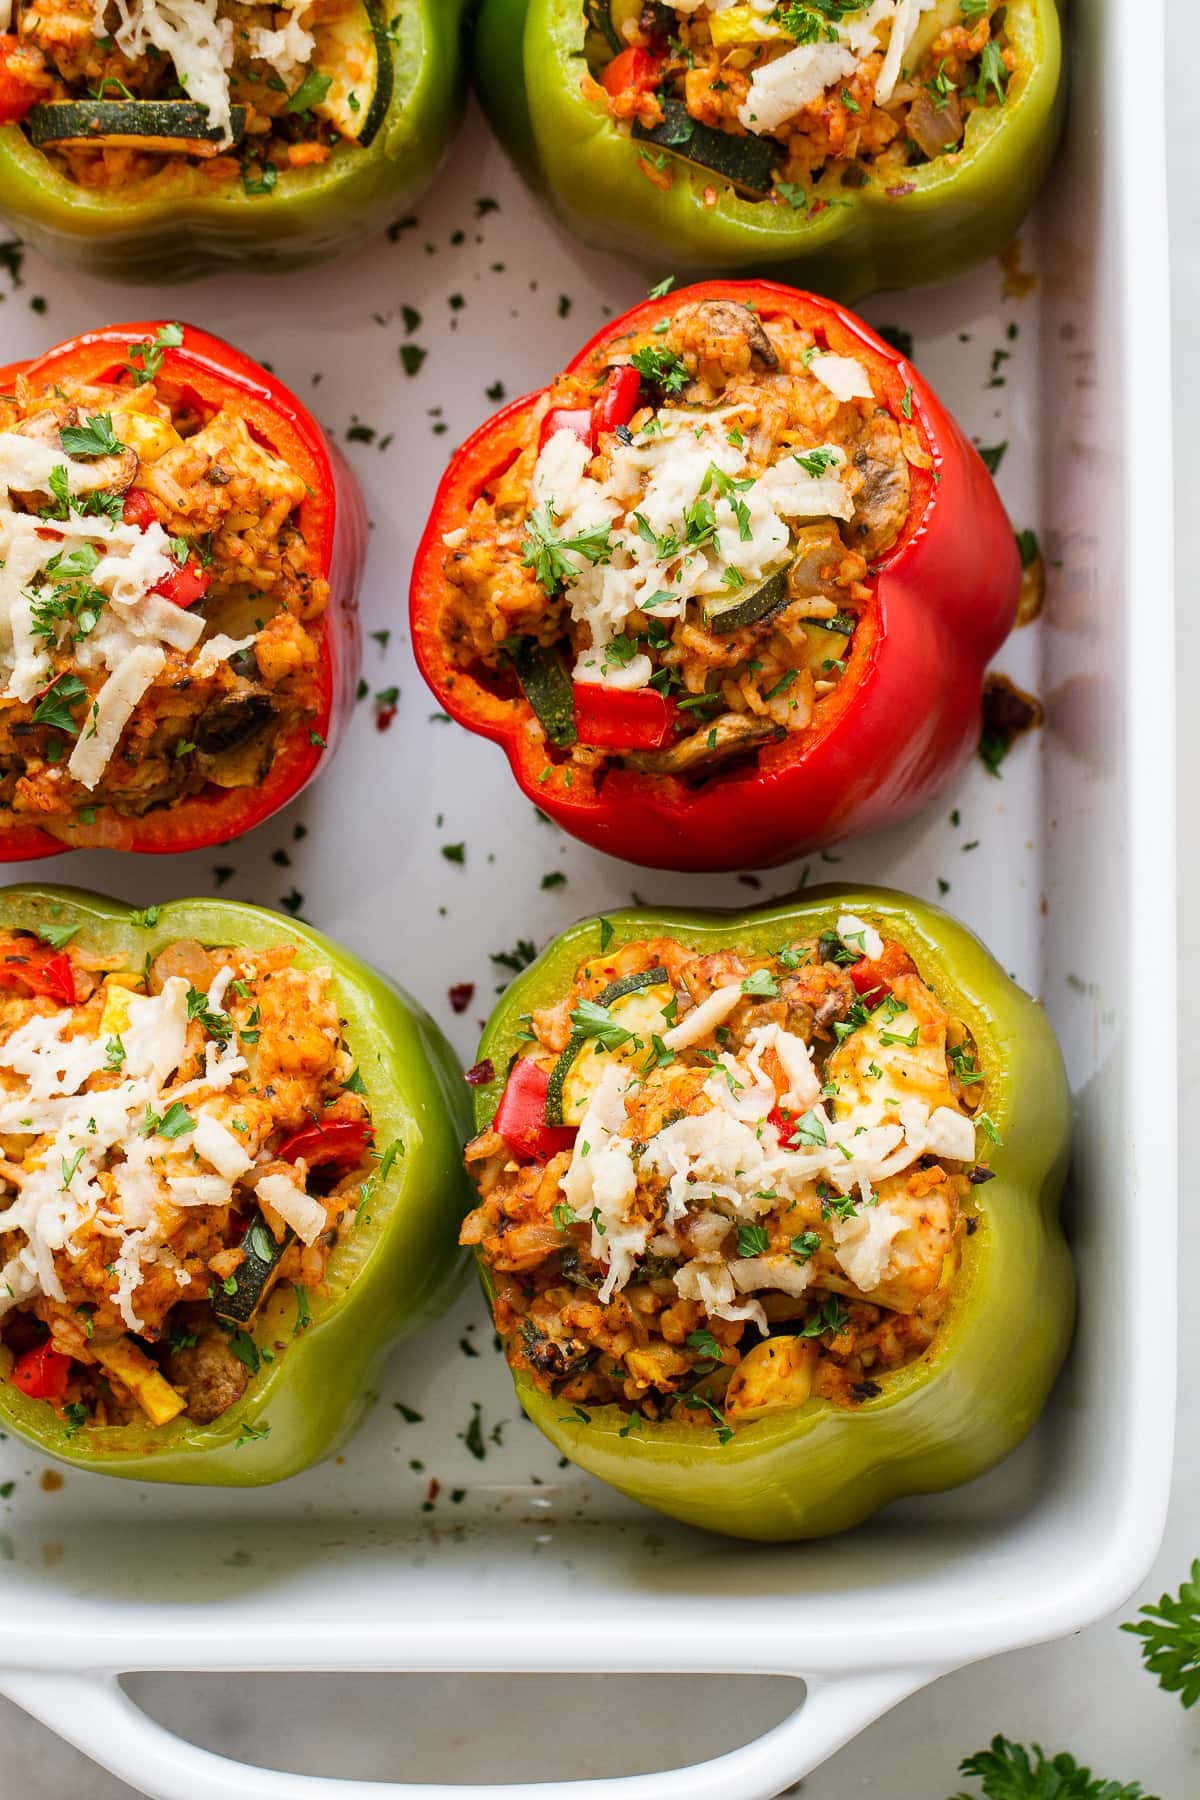 top down view of vegan stuffed bell peppers freshly baked in a baking dish.